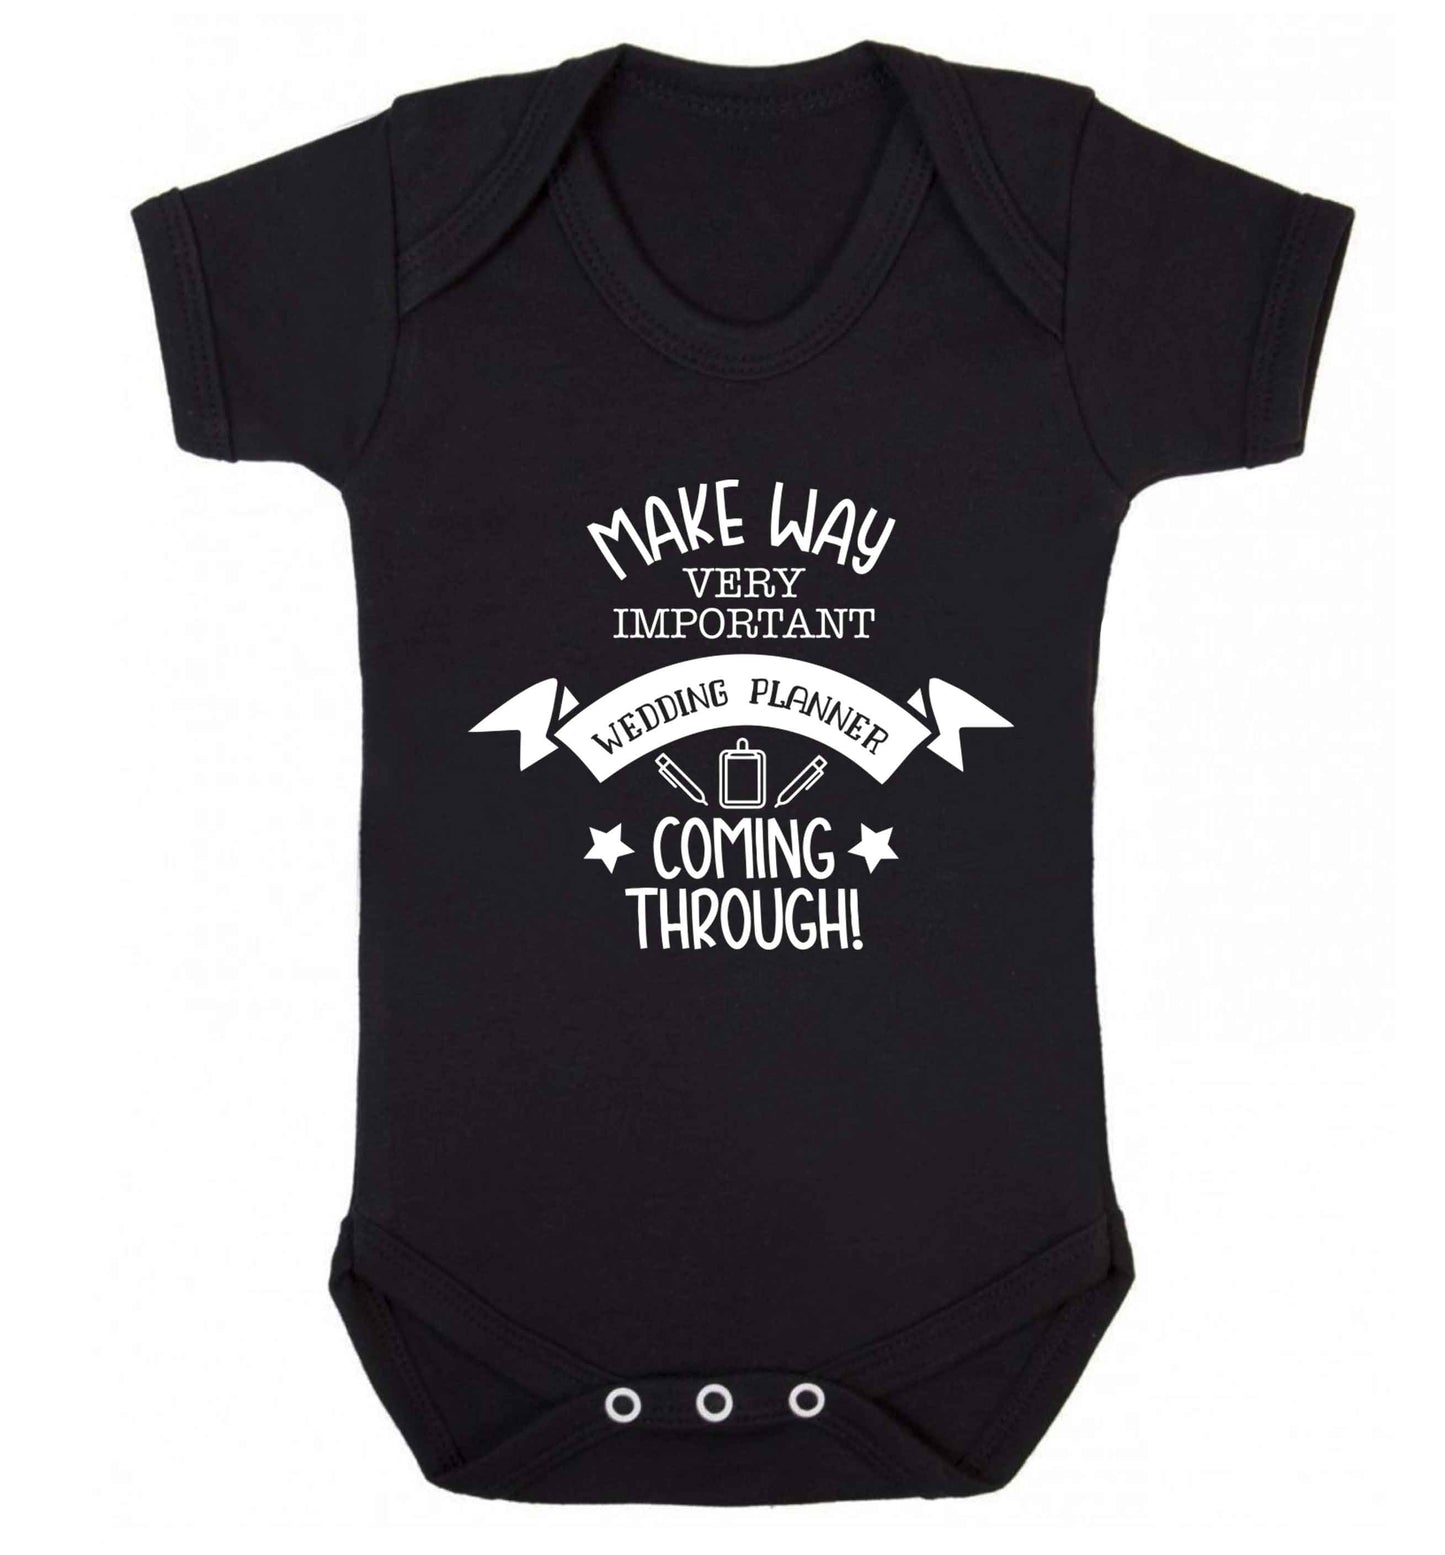 Make way very important wedding planner coming through Baby Vest black 18-24 months